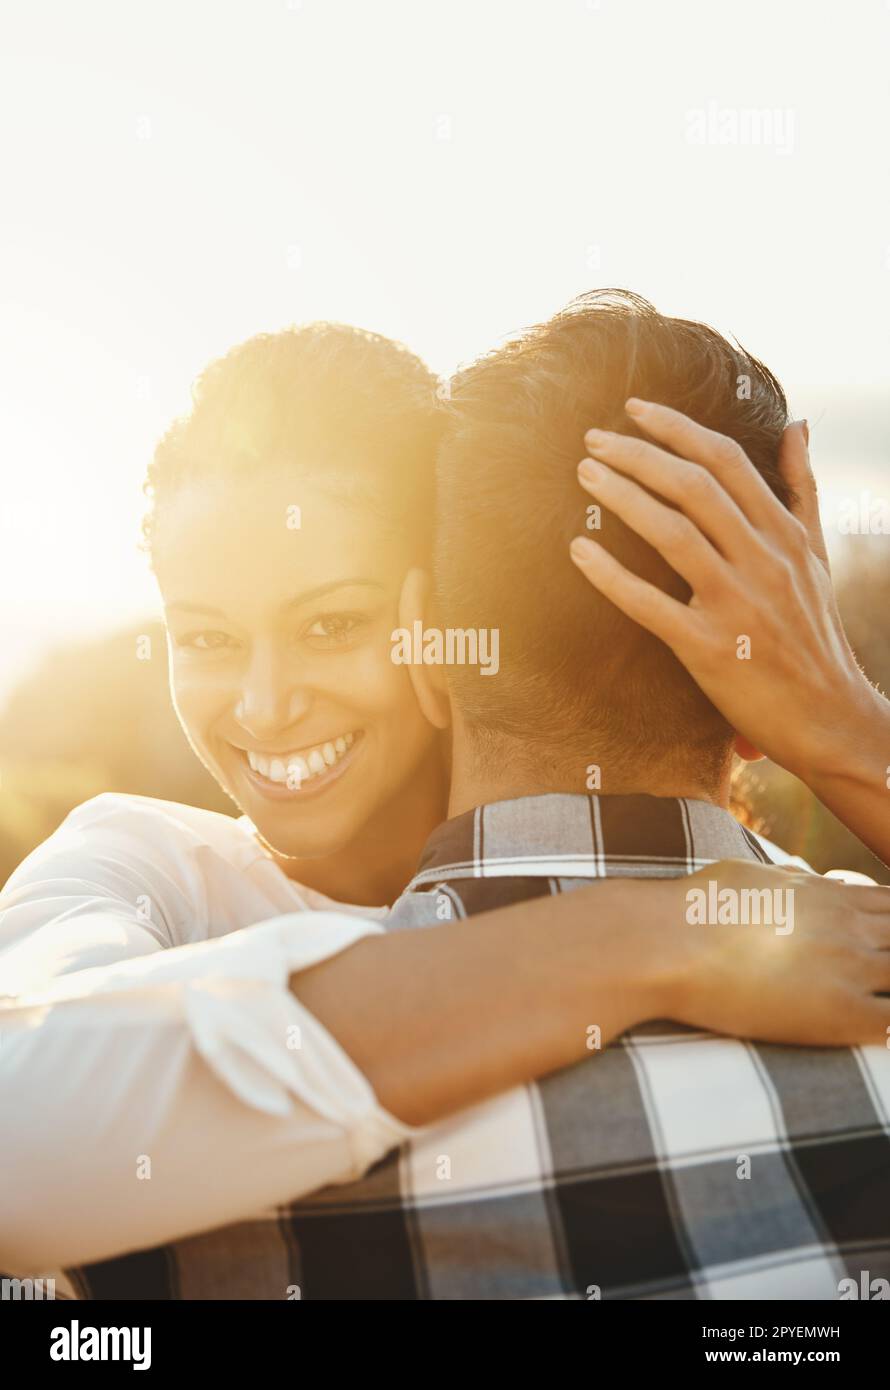 Im lucky to have met my soulmate. a loving couple spending the day on the beach. Stock Photo